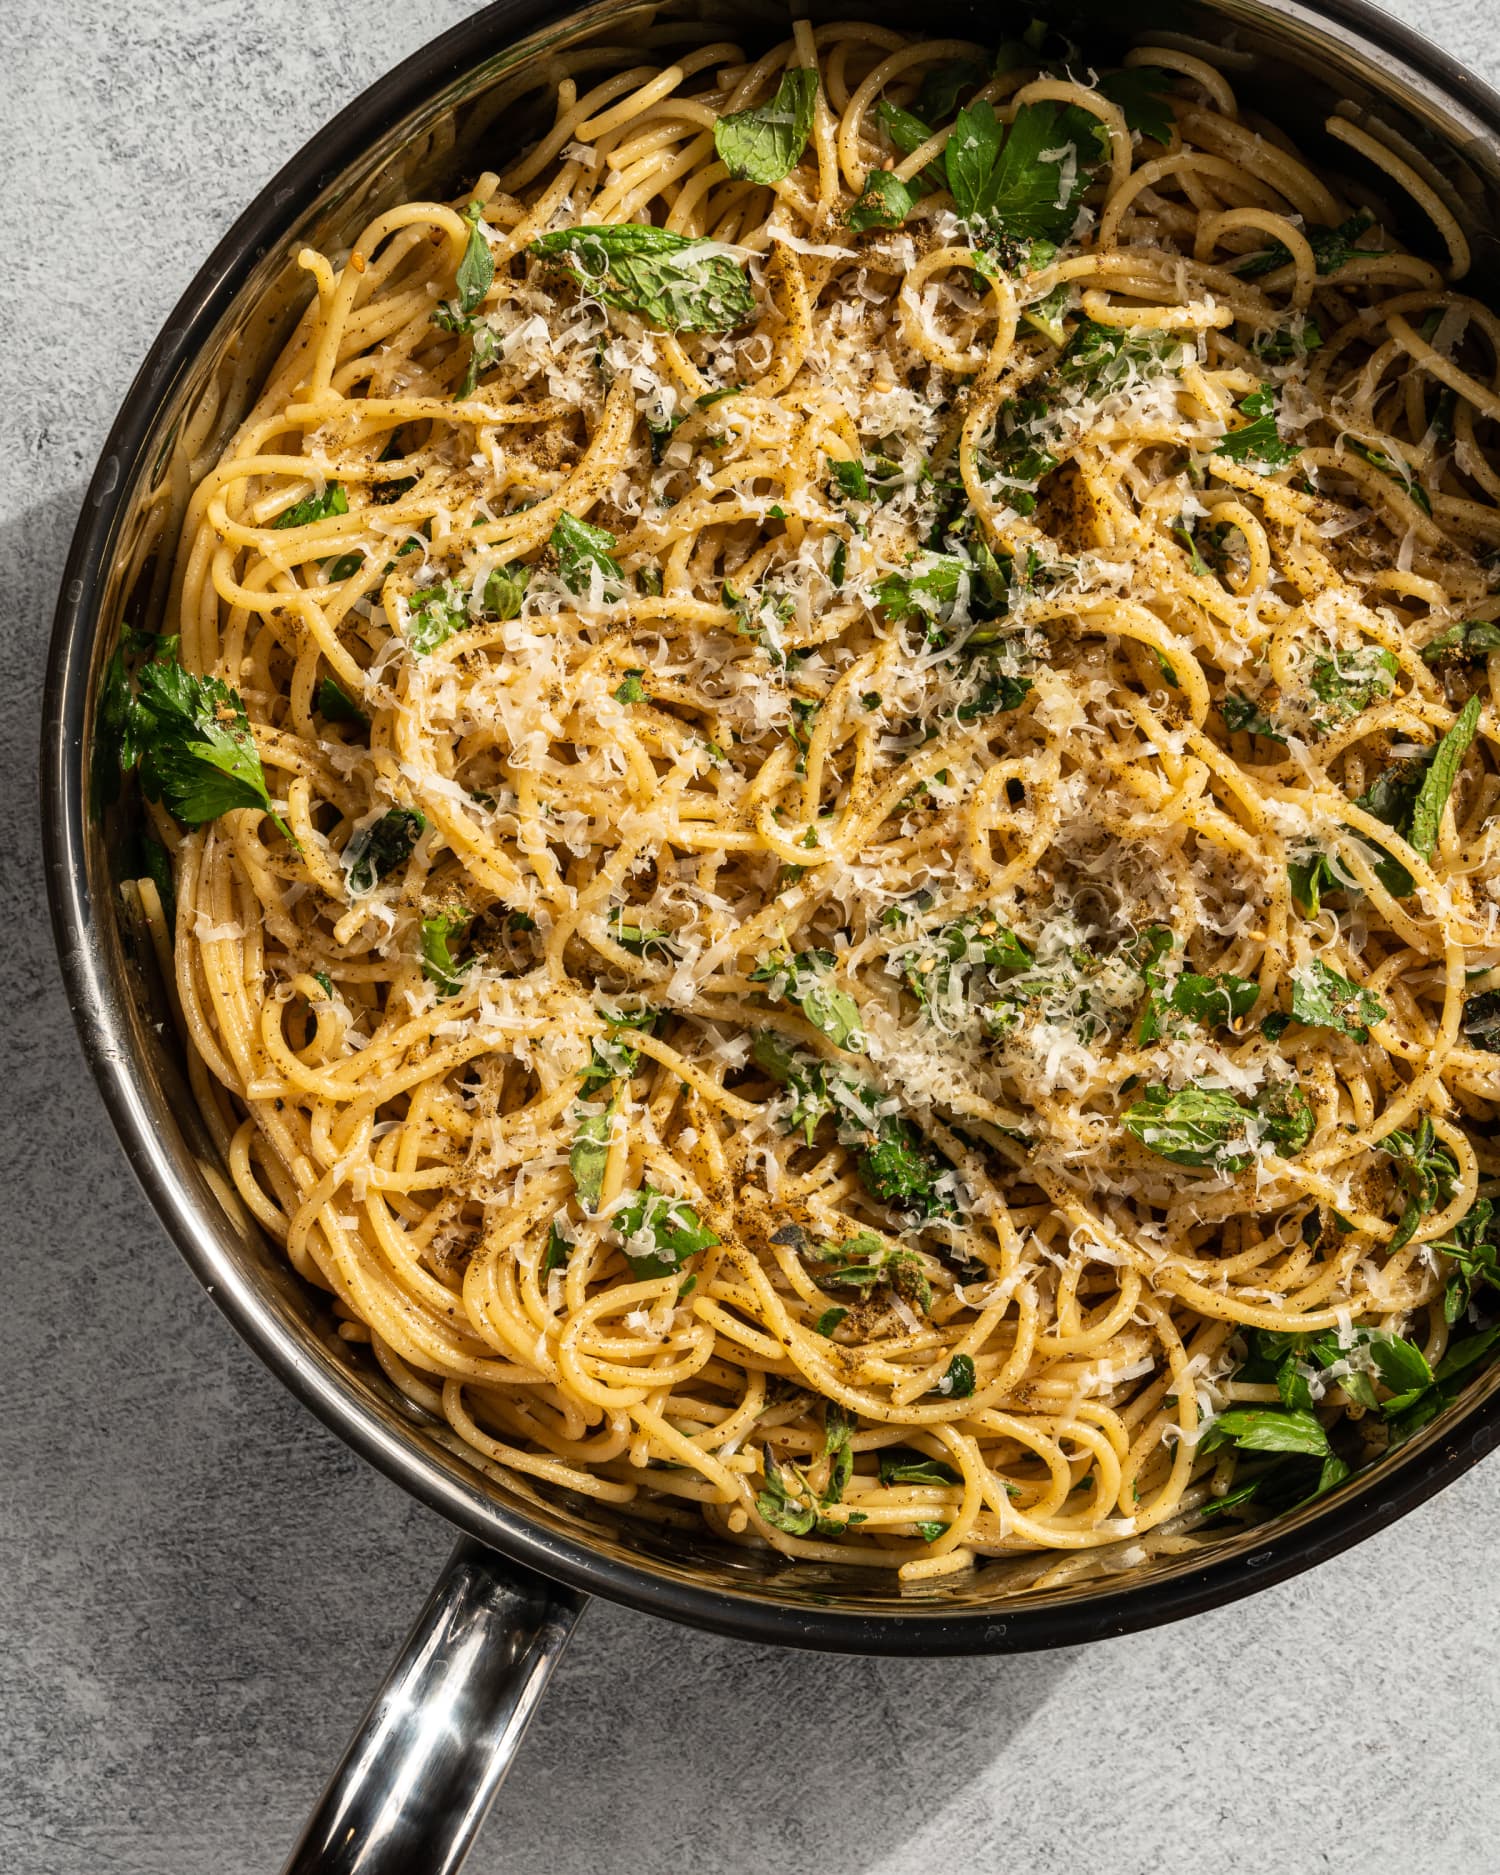 The Surprising Spice That Transforms Your Average Buttered Pasta